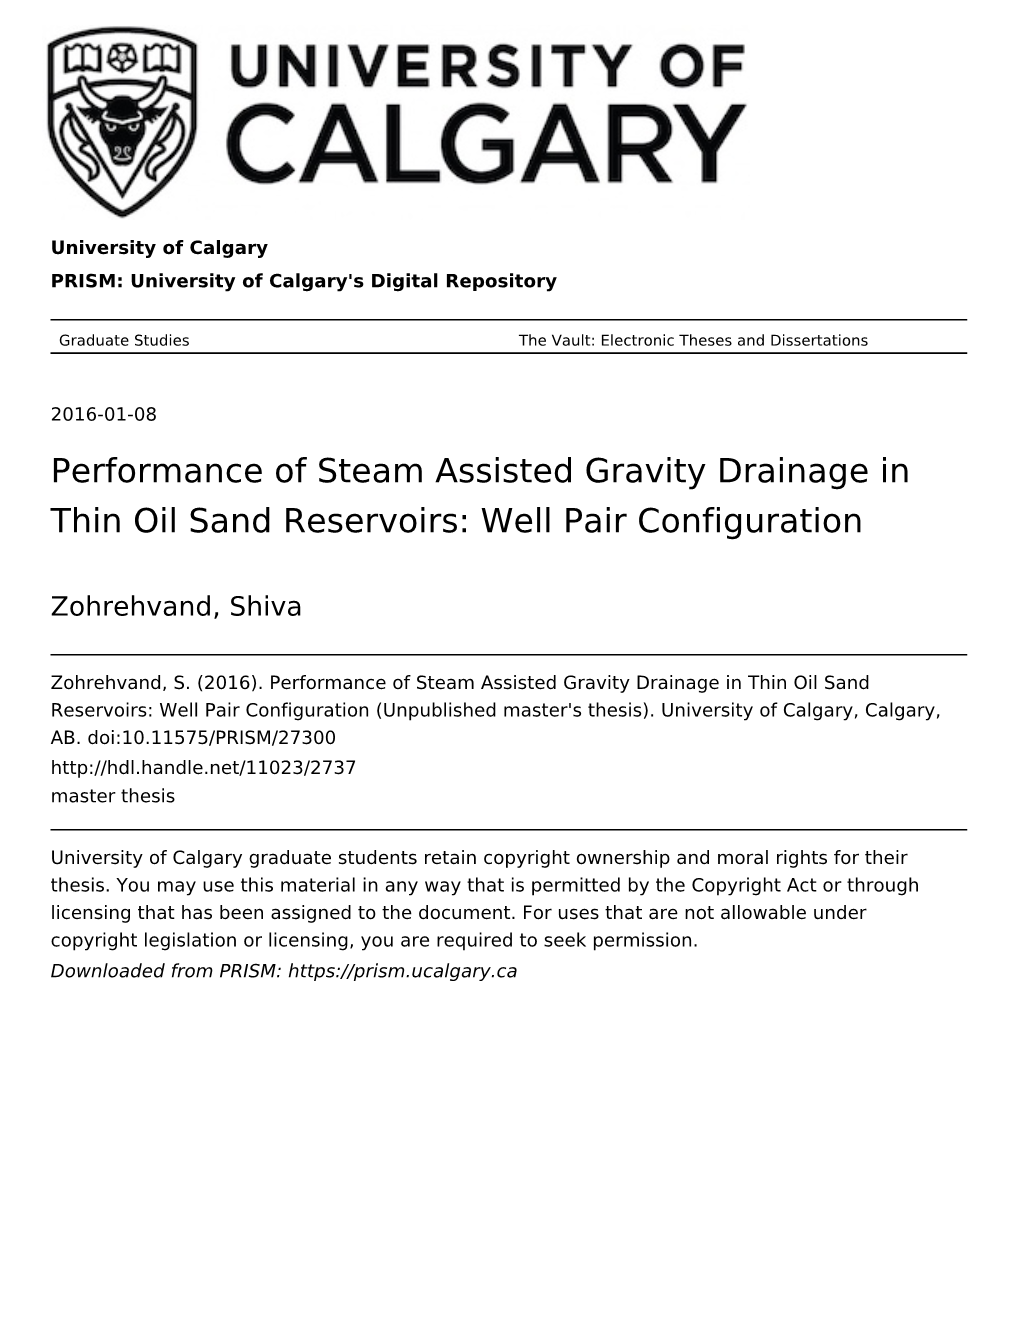 Performance of Steam Assisted Gravity Drainage in Thin Oil Sand Reservoirs: Well Pair Configuration